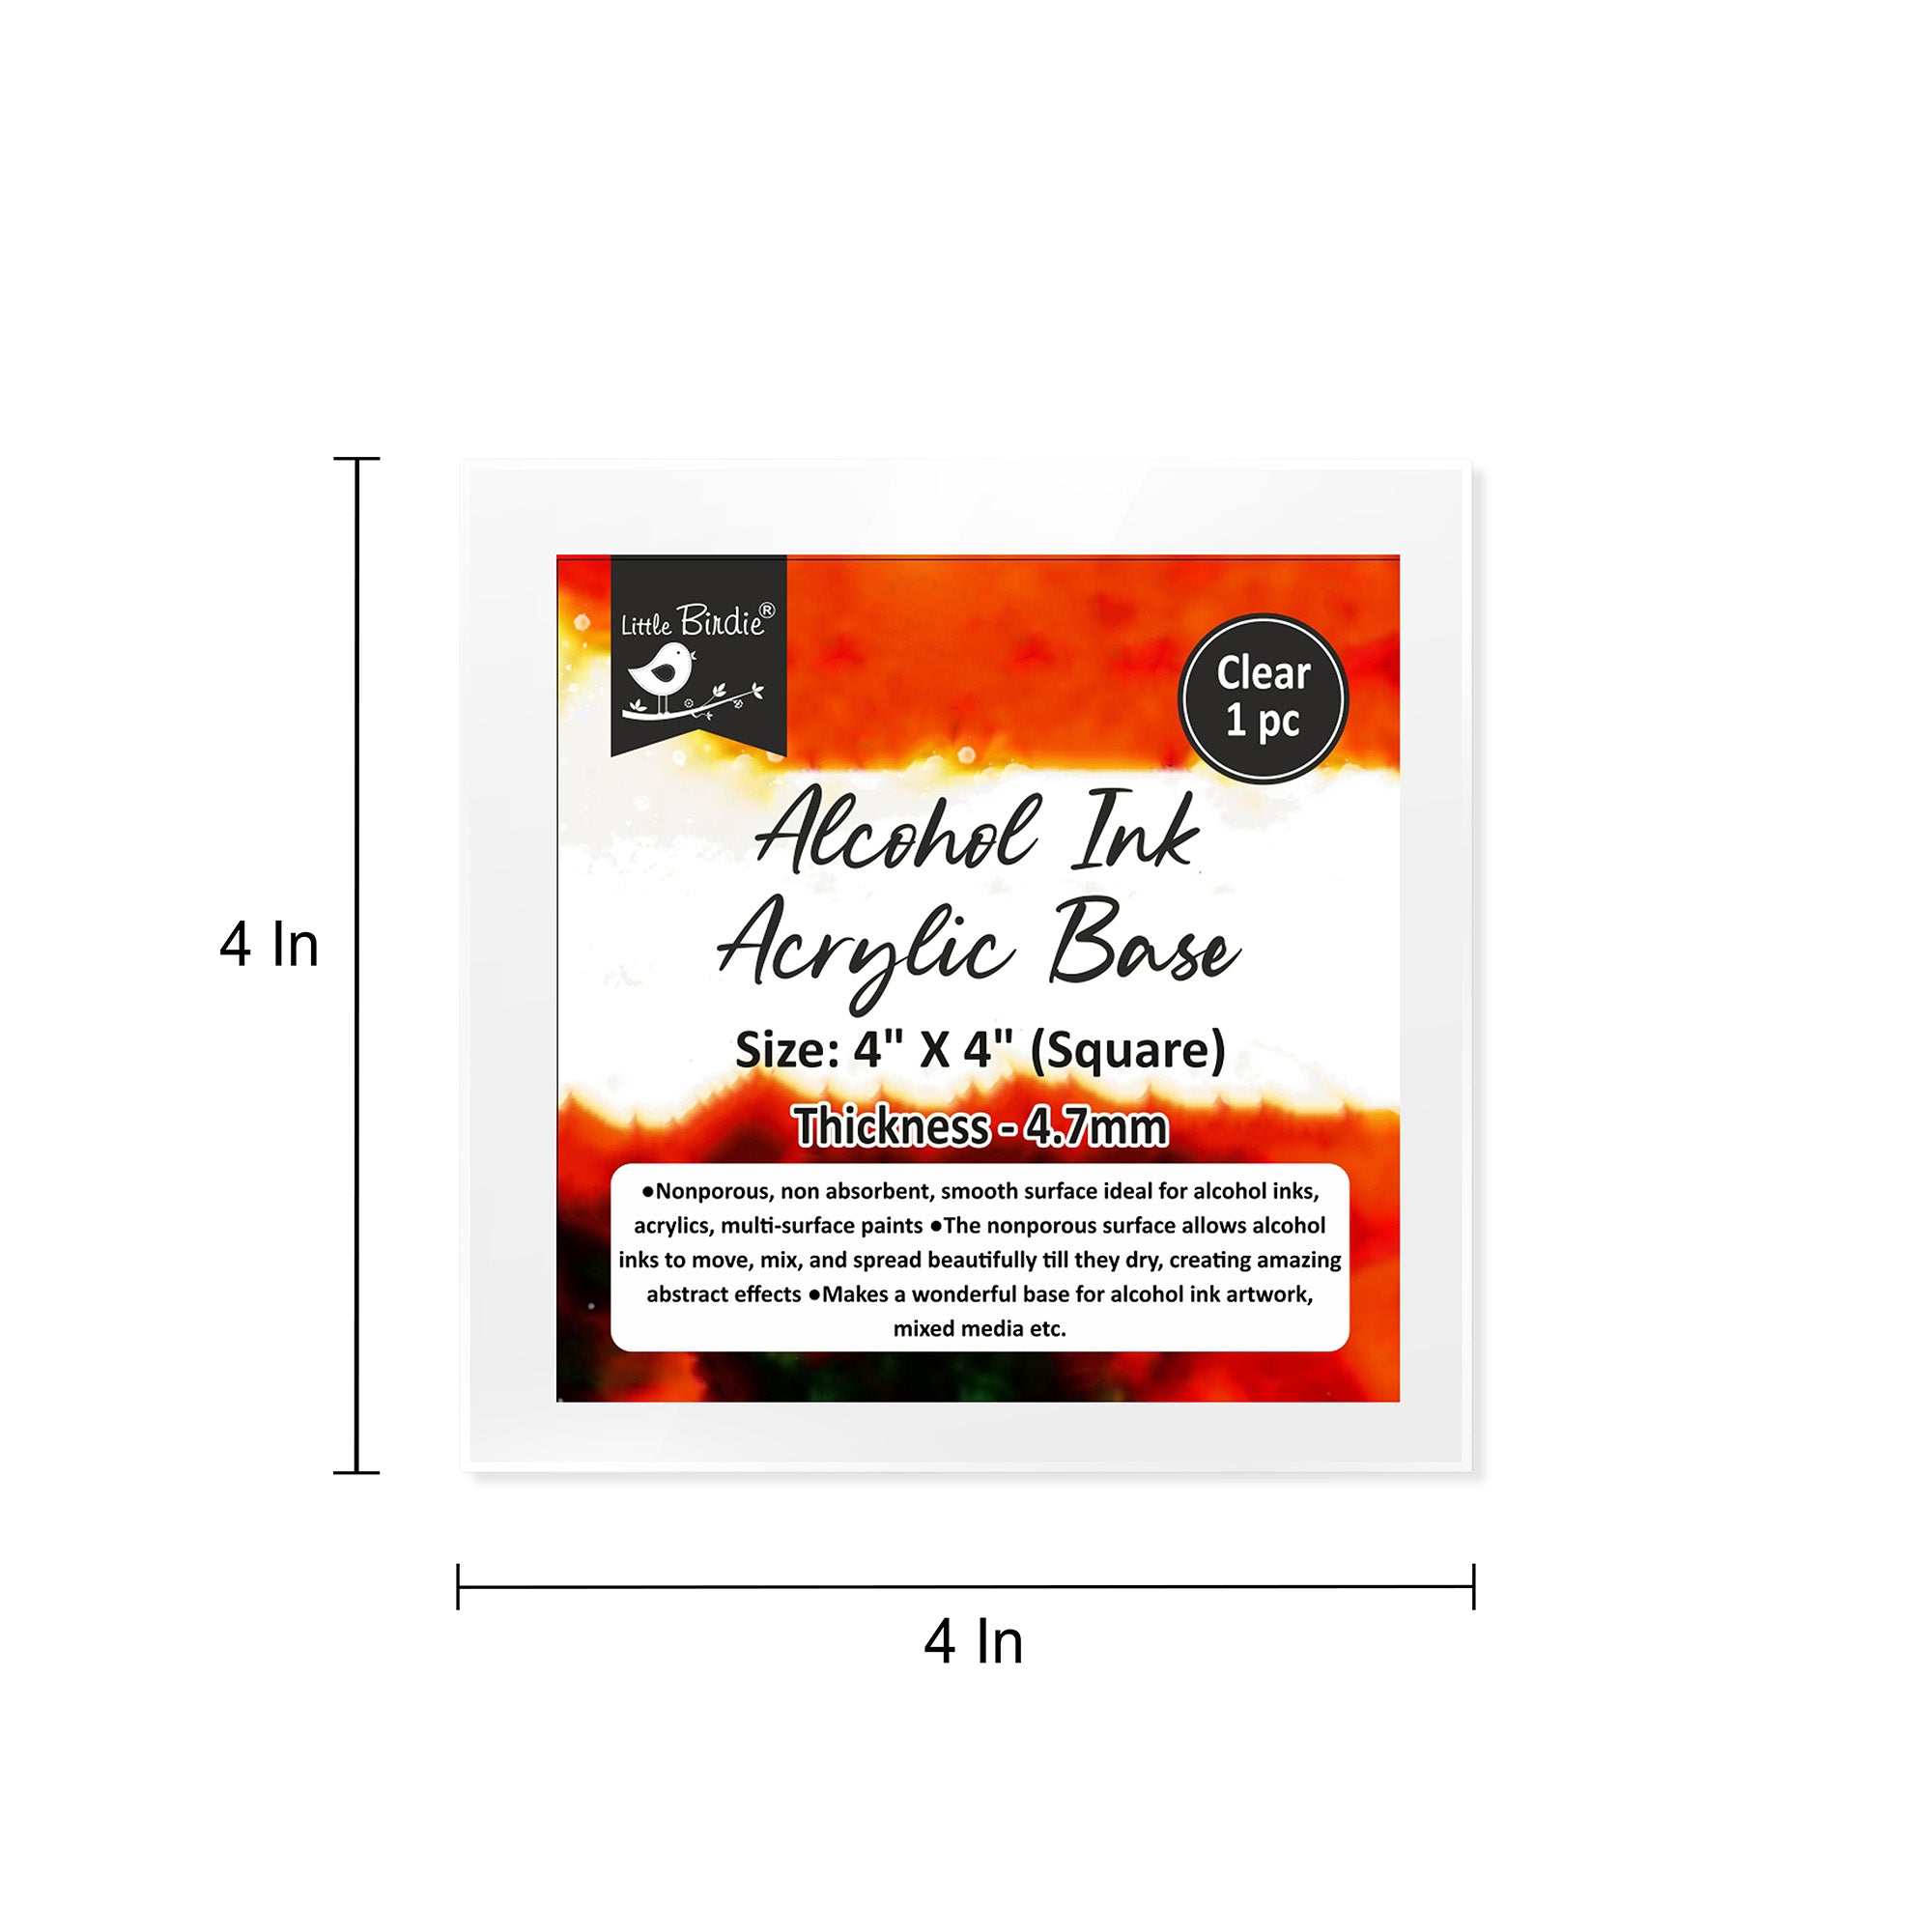 Acrylic Base Clear 3.7Mm Thickness 4Inch X 4Inch 1Pc Shrink Lb